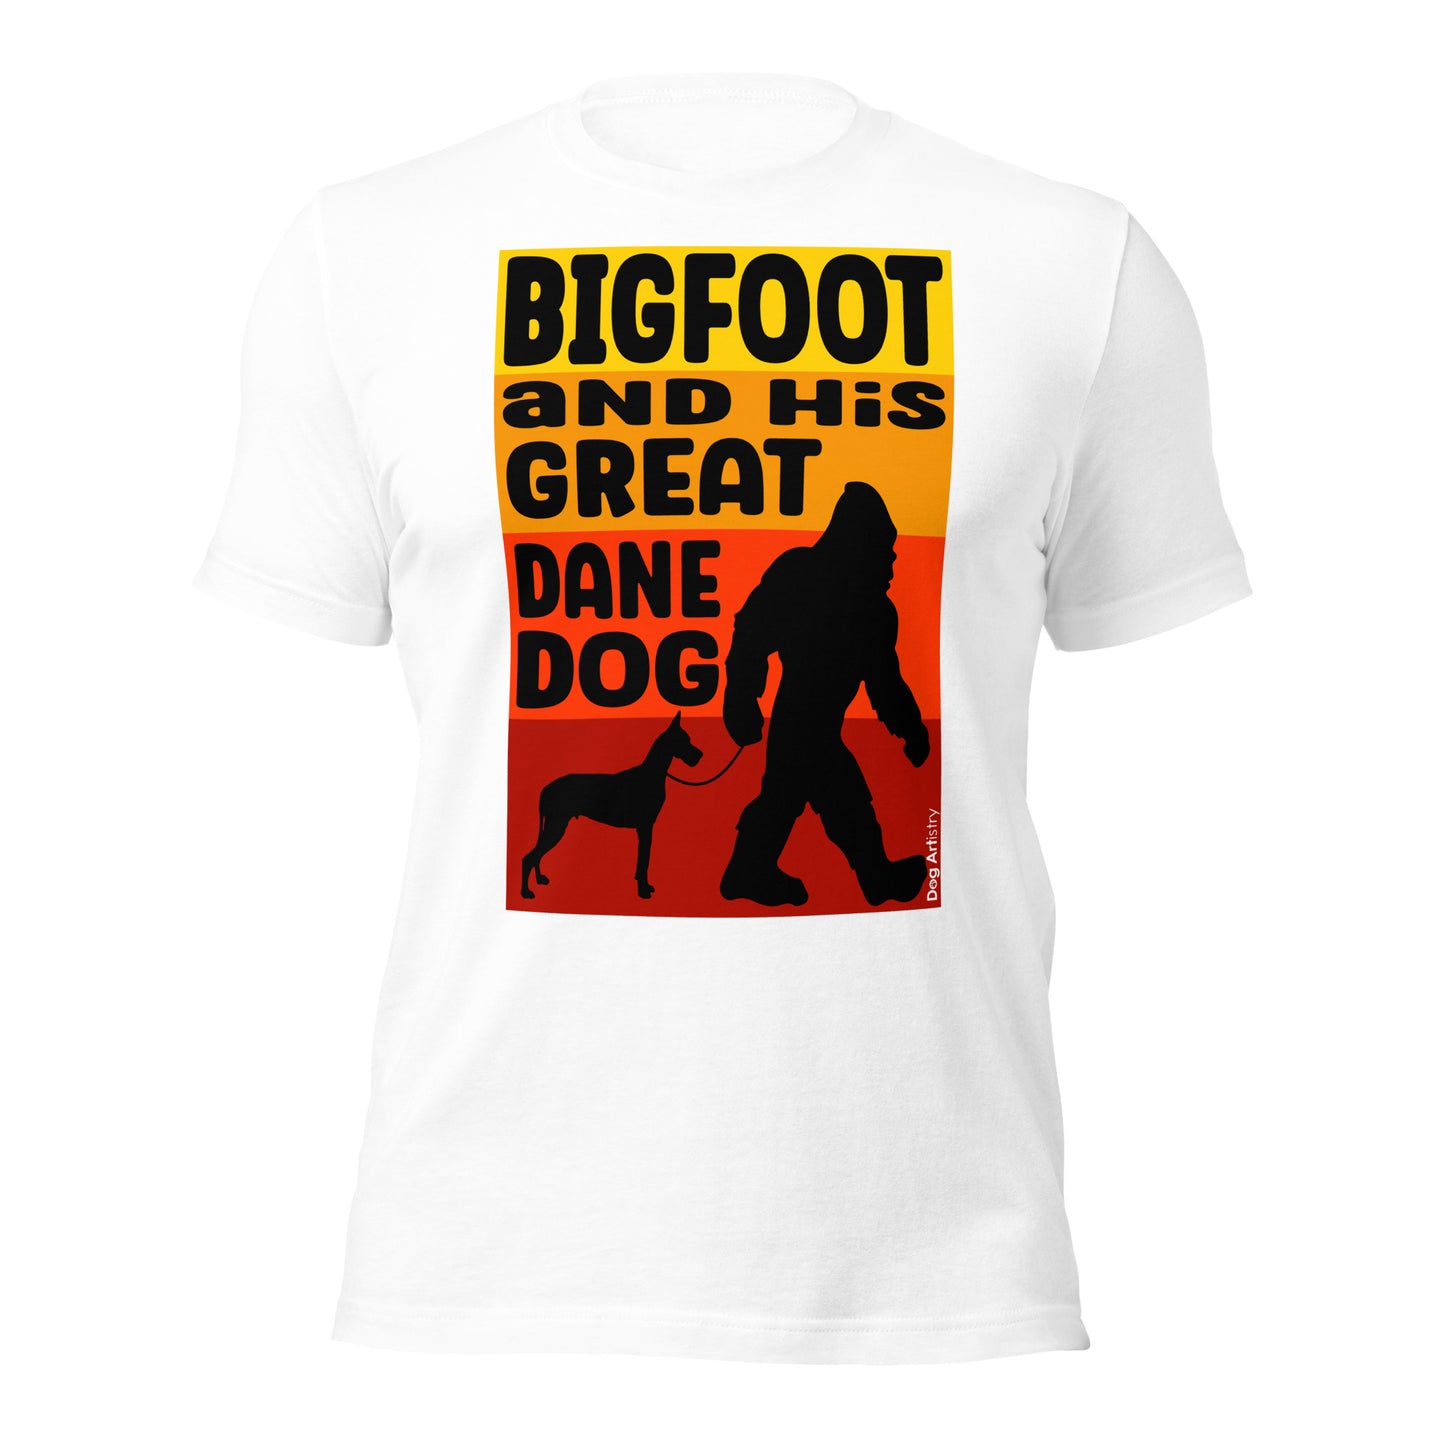 Bigfoot and his Great Dane unisex white t-shirt by Dog Artistry.